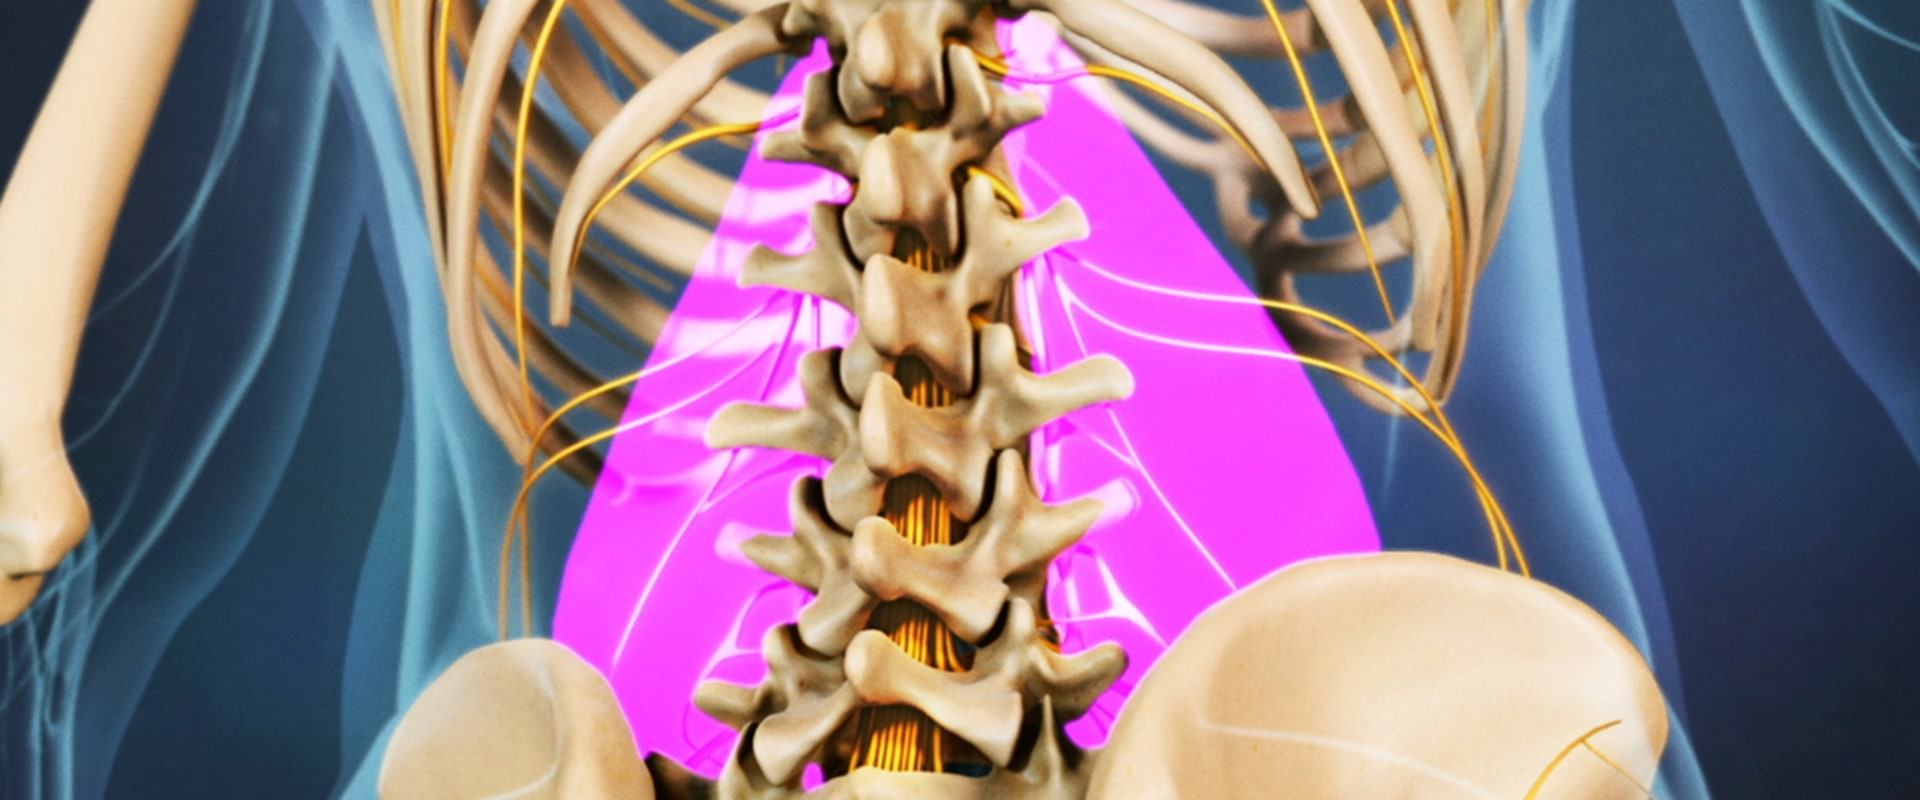 What part of the back is most commonly affected by back injury and back pain?